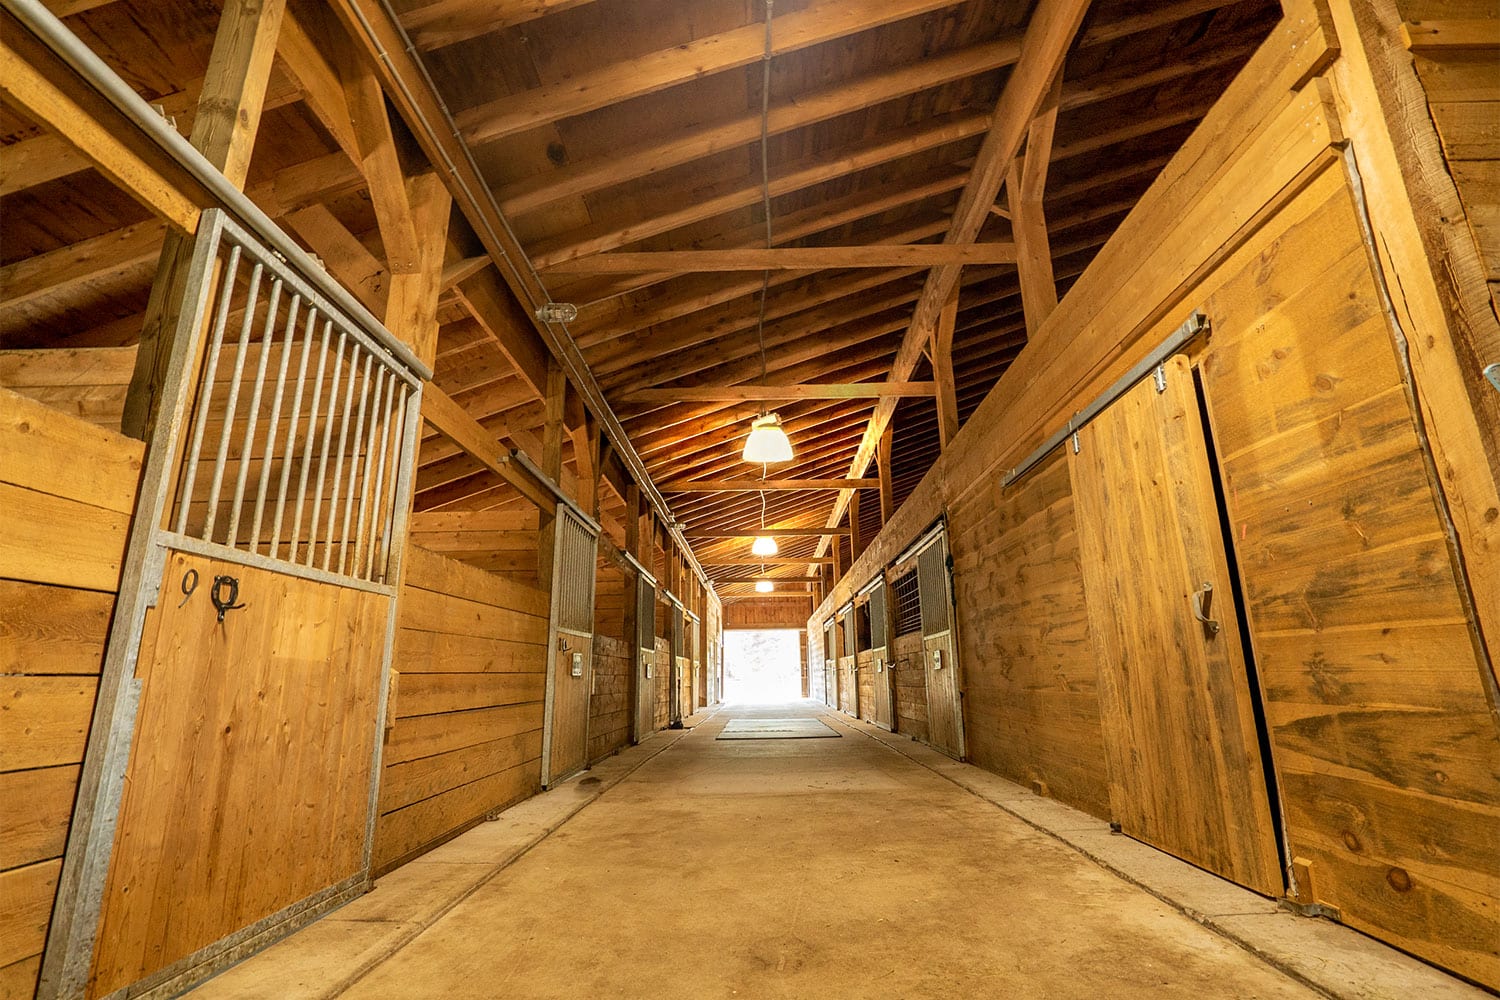 A photo of the horse stalls and arena at Foundation House's FoxHole Ranch.